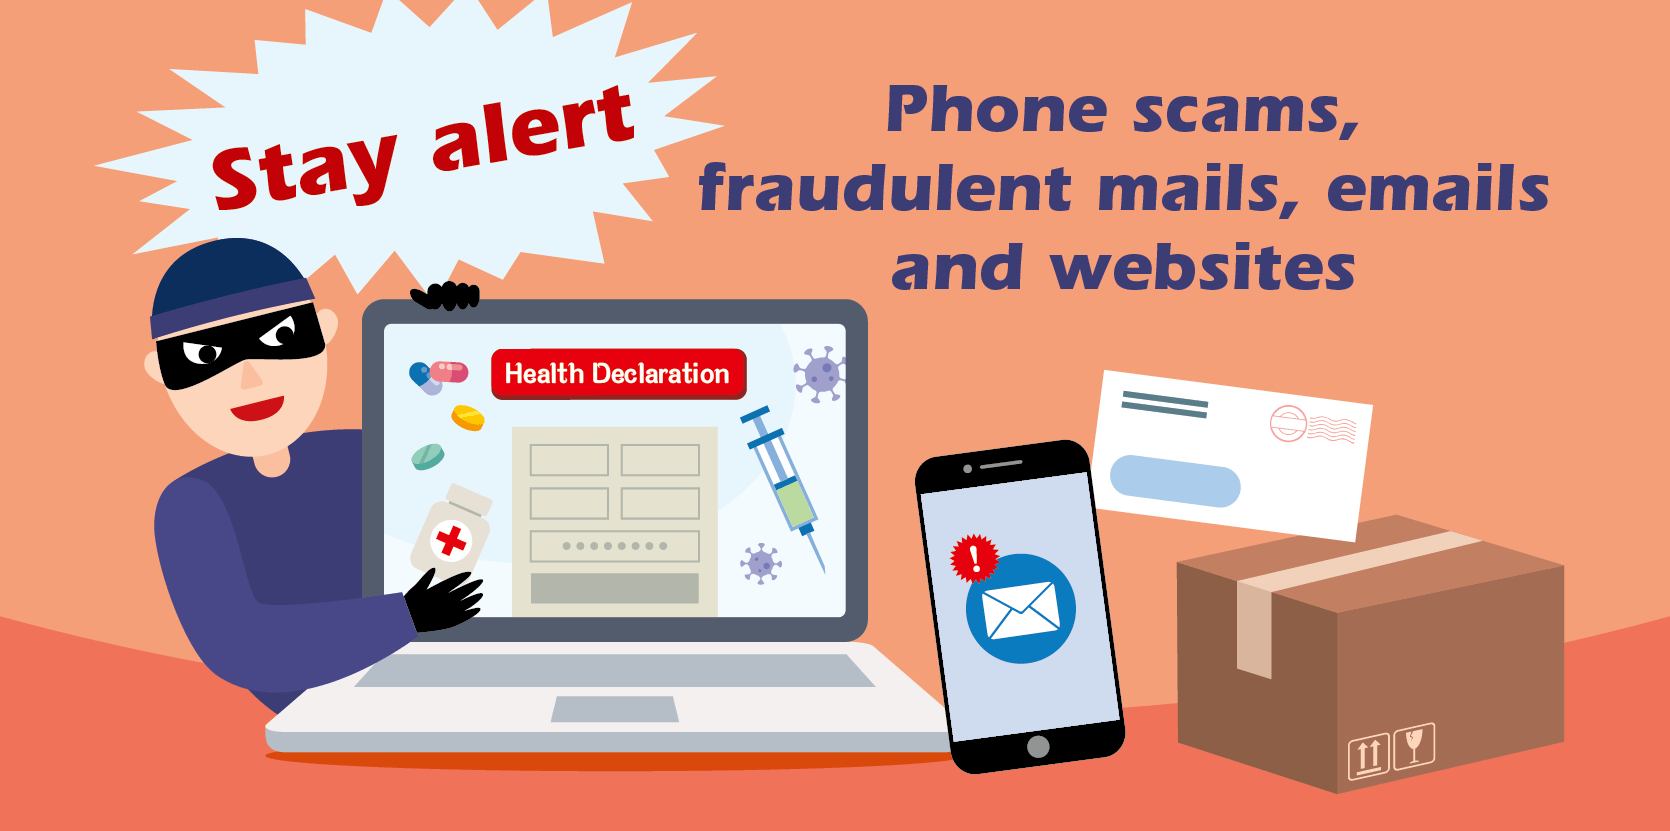 Stay alert to phone scams, fraudulent emails and websites